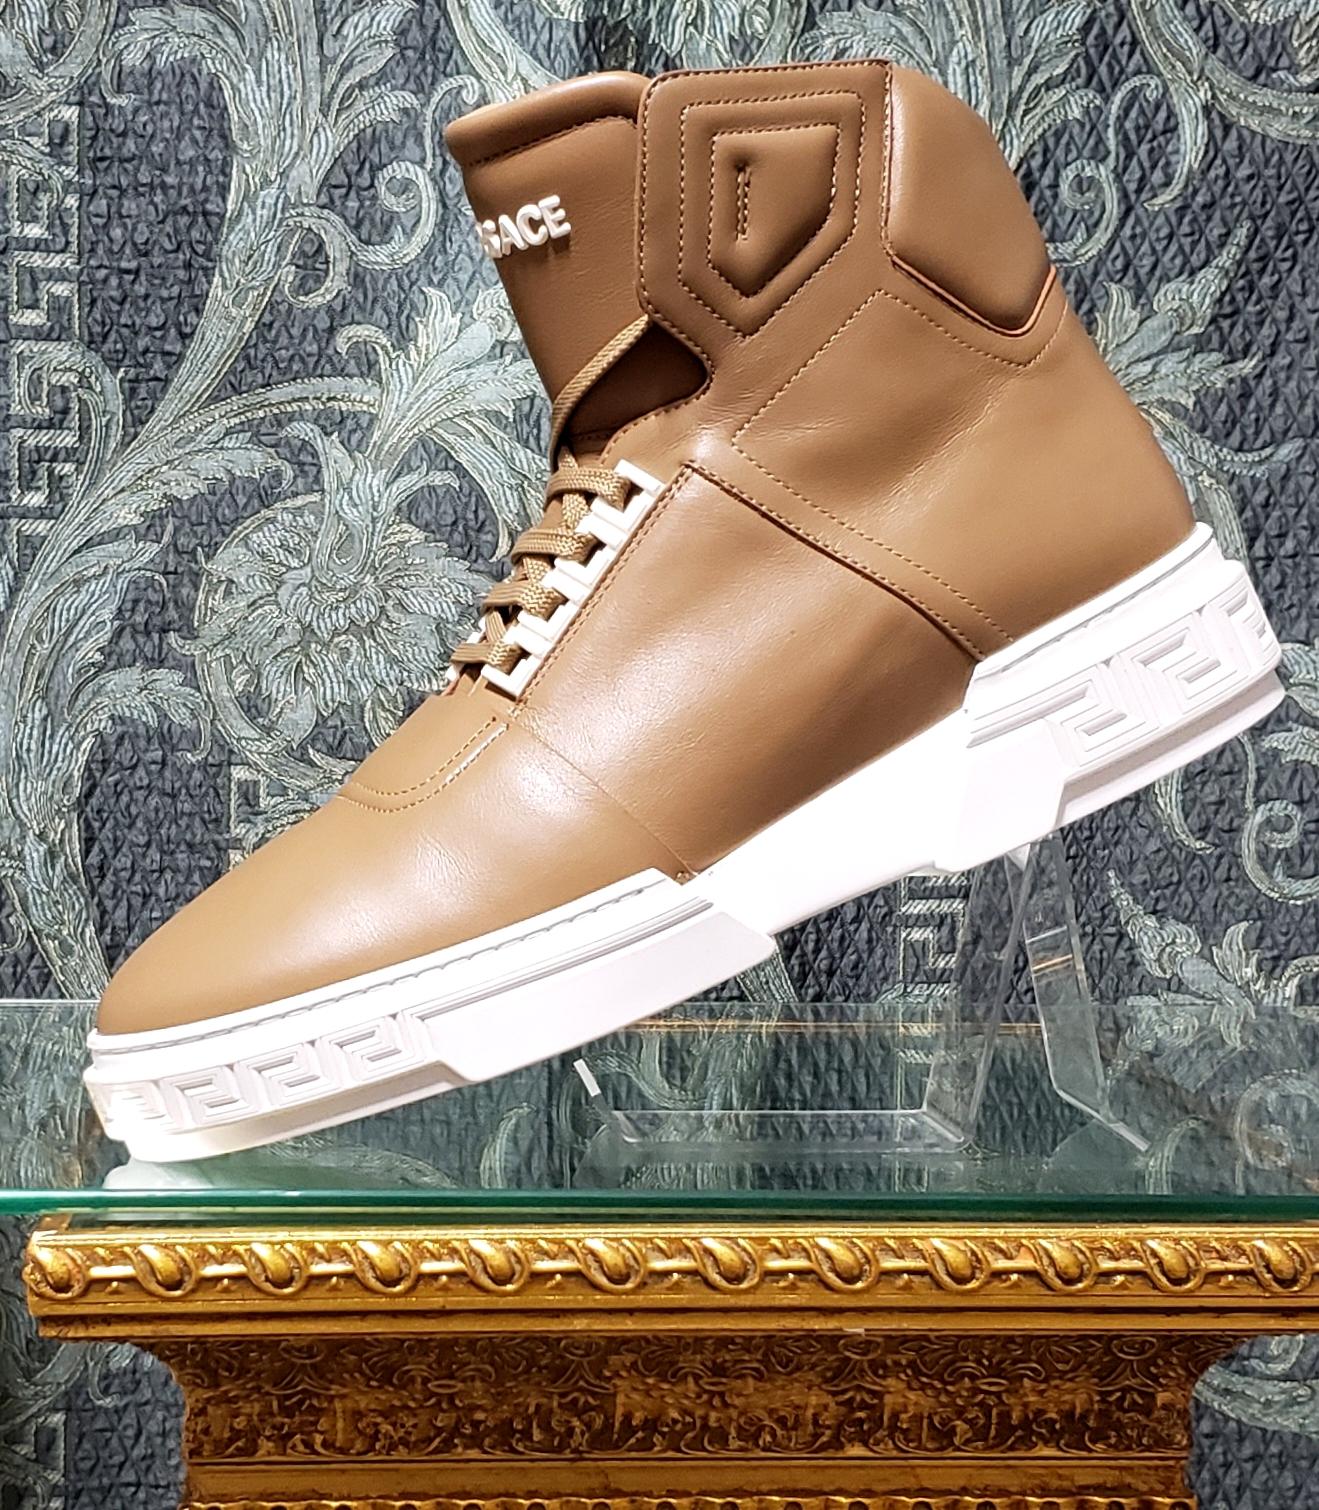 New VERSACE HIGH -TOP MOCHA LEATHER LACE UP SNEAKERS 44 - 11 4